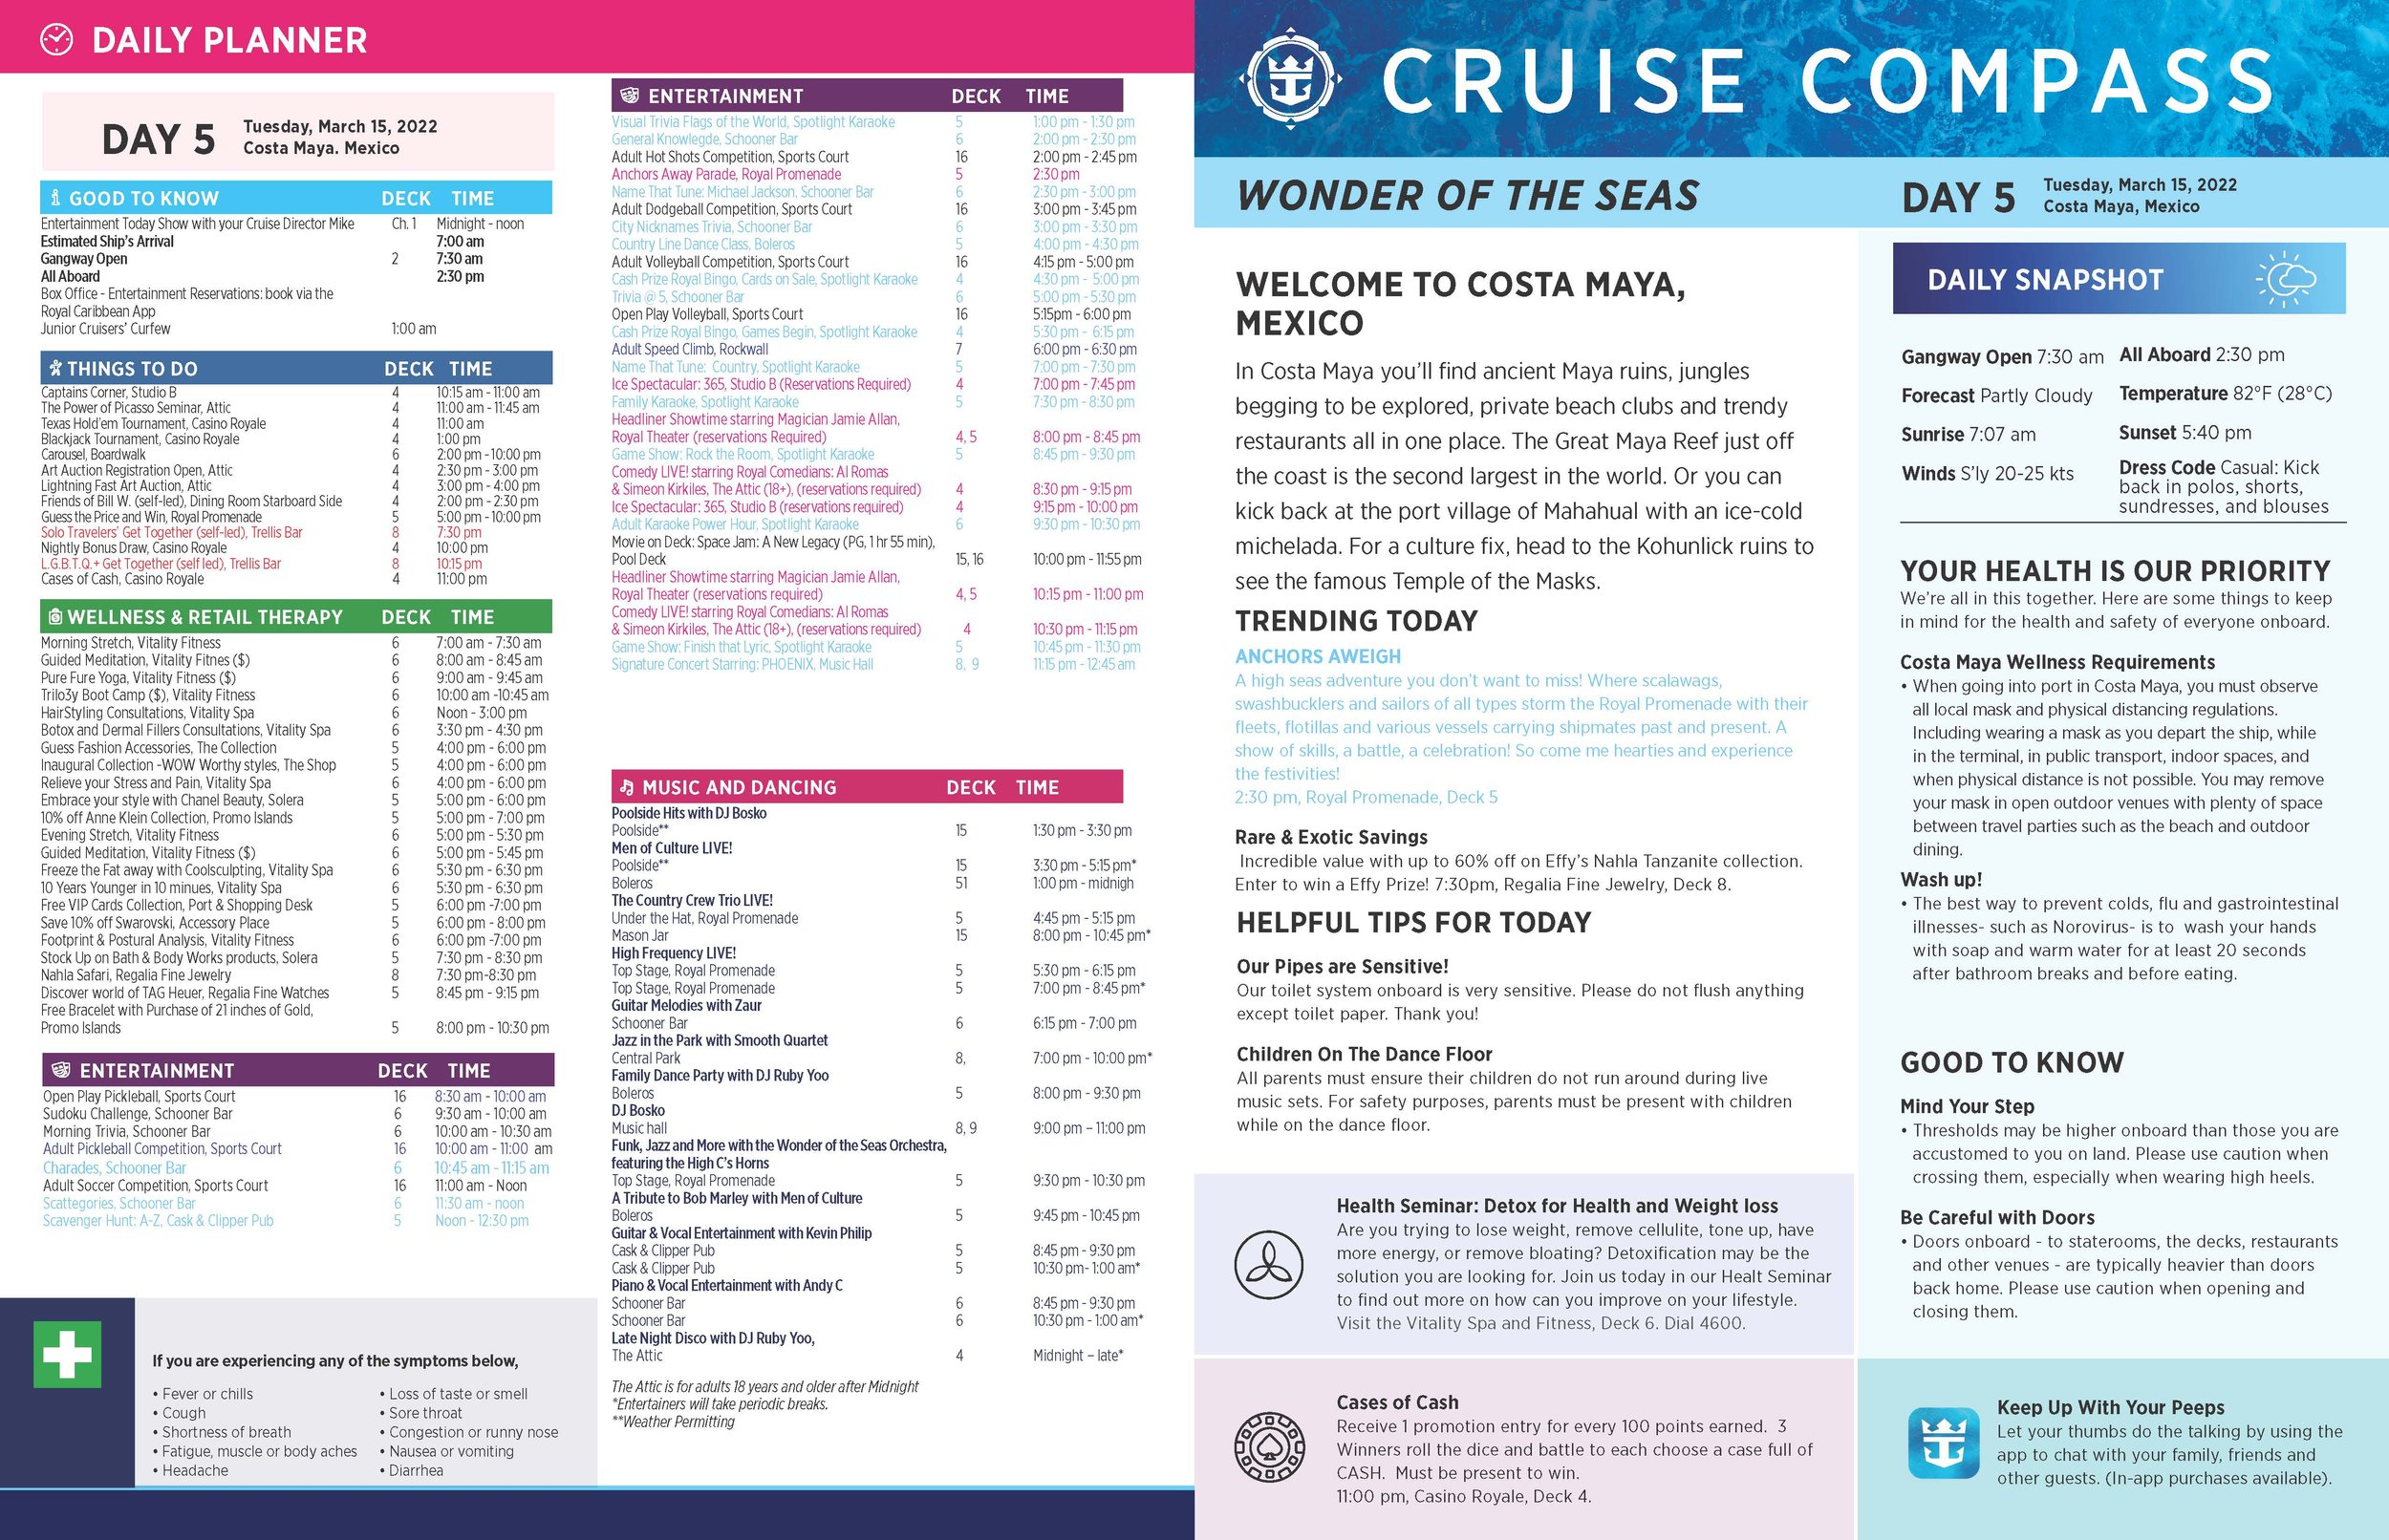 Cruise Compass - Day 5 - Tuesday, March 15. 2022,  Costa Maya, Mexico_Page_1.jpg